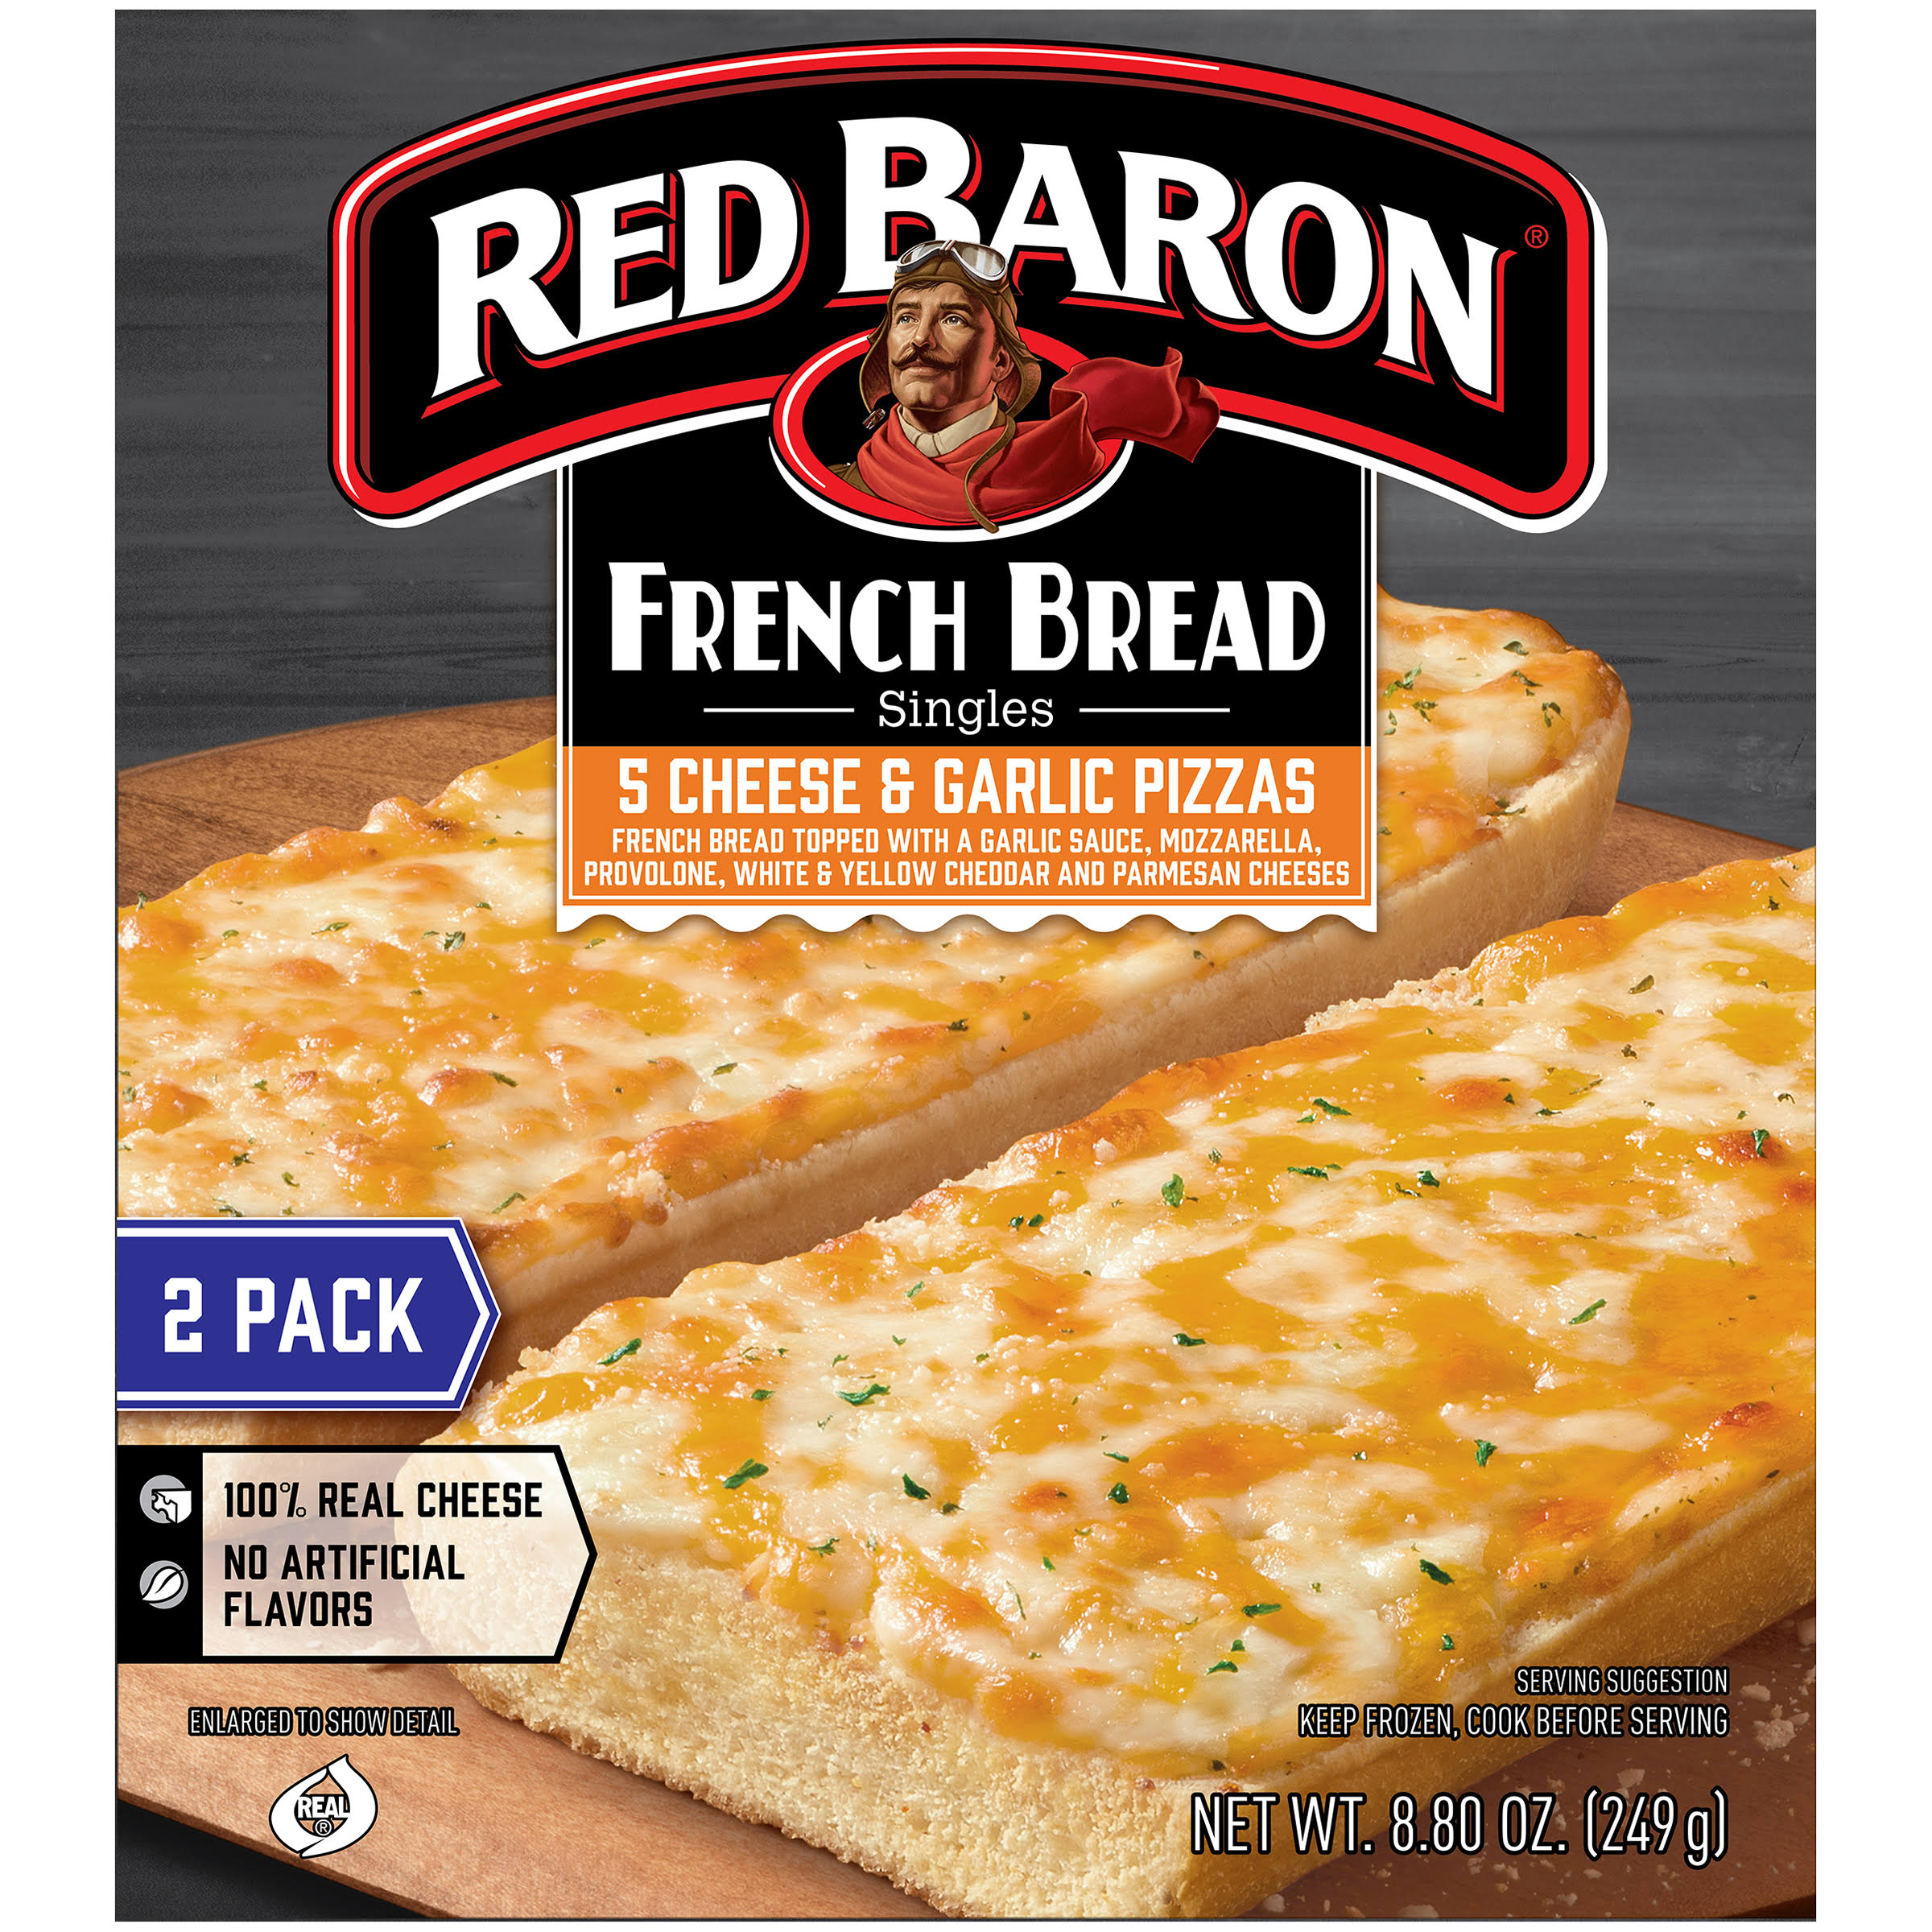 Red Baron Singles French Bread - Cheese & Garlic Pizzas, 2ct, 8.80oz